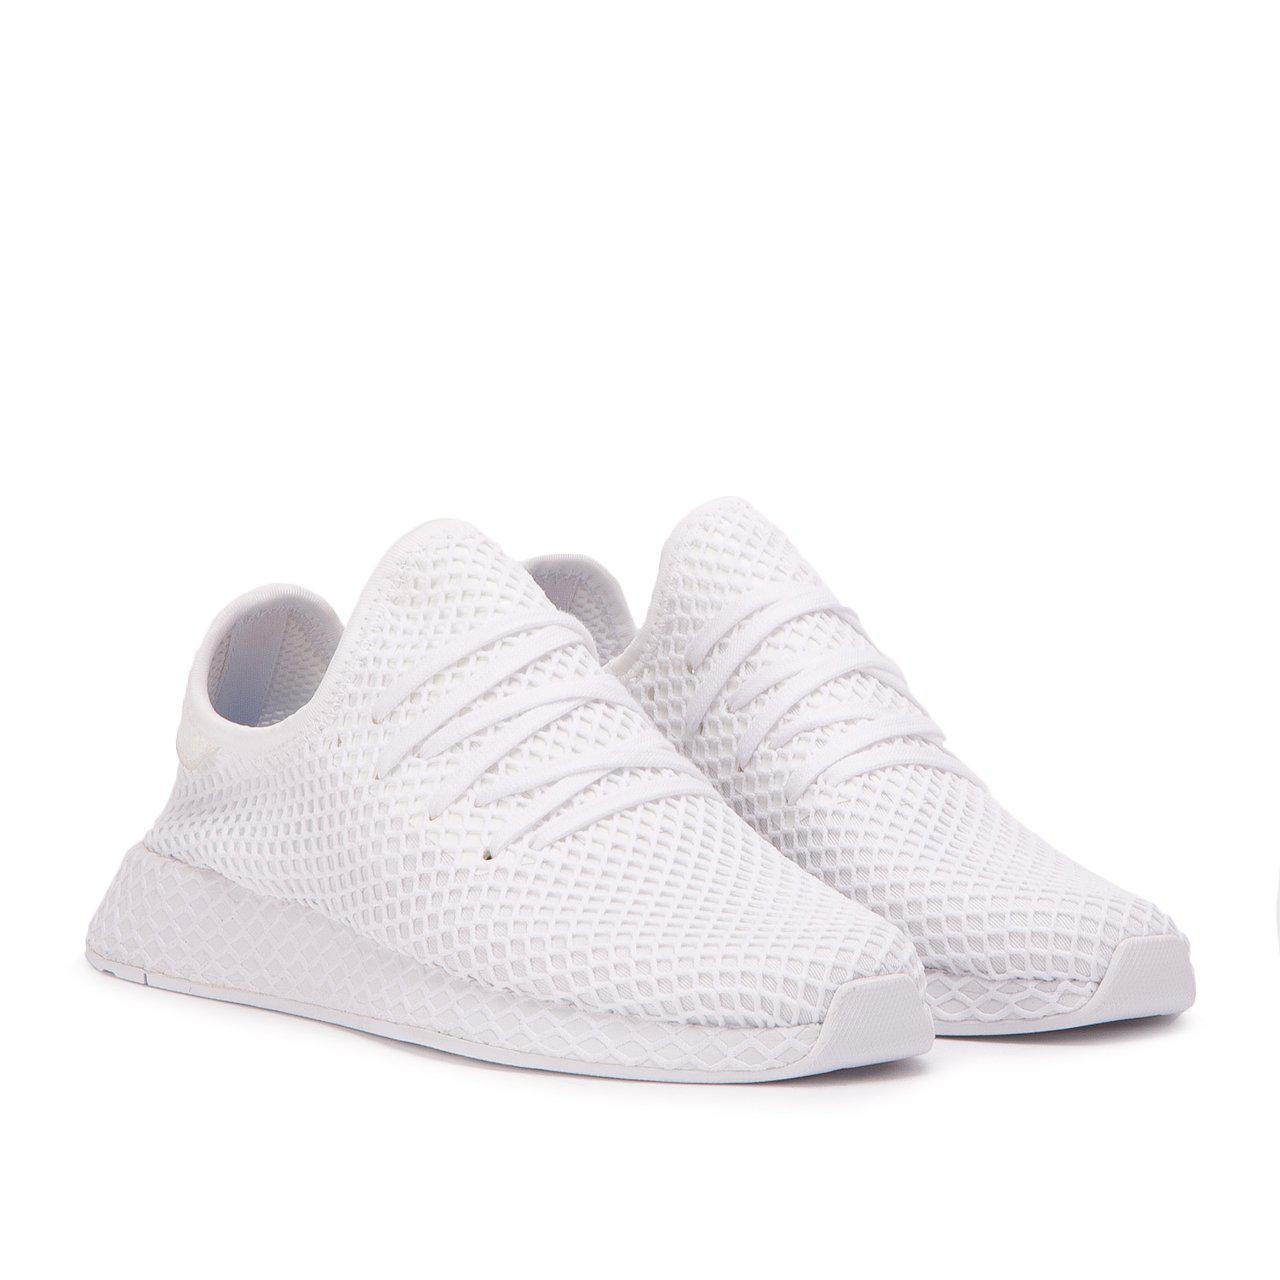 adidas shoes deerupt white